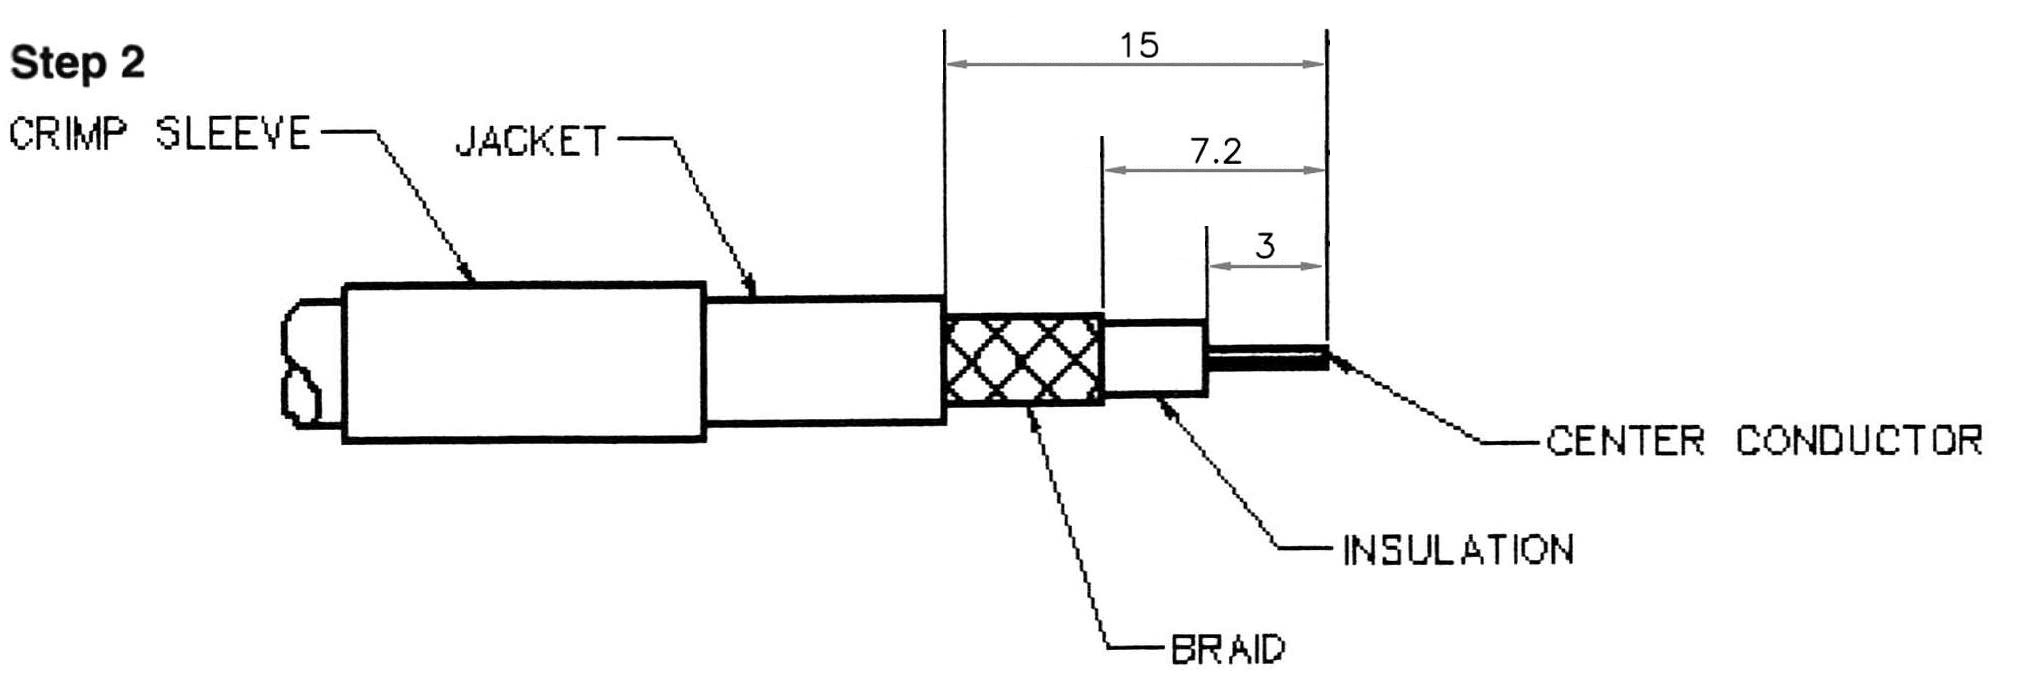 BNC male Crimp On for RG-223, RG-59, LMR-240, RG-8X mini 8, and other 0.240 Inch OD Coax 7005-BNC-8X Installation Guide step 2 - Max-Gain Systems Inc